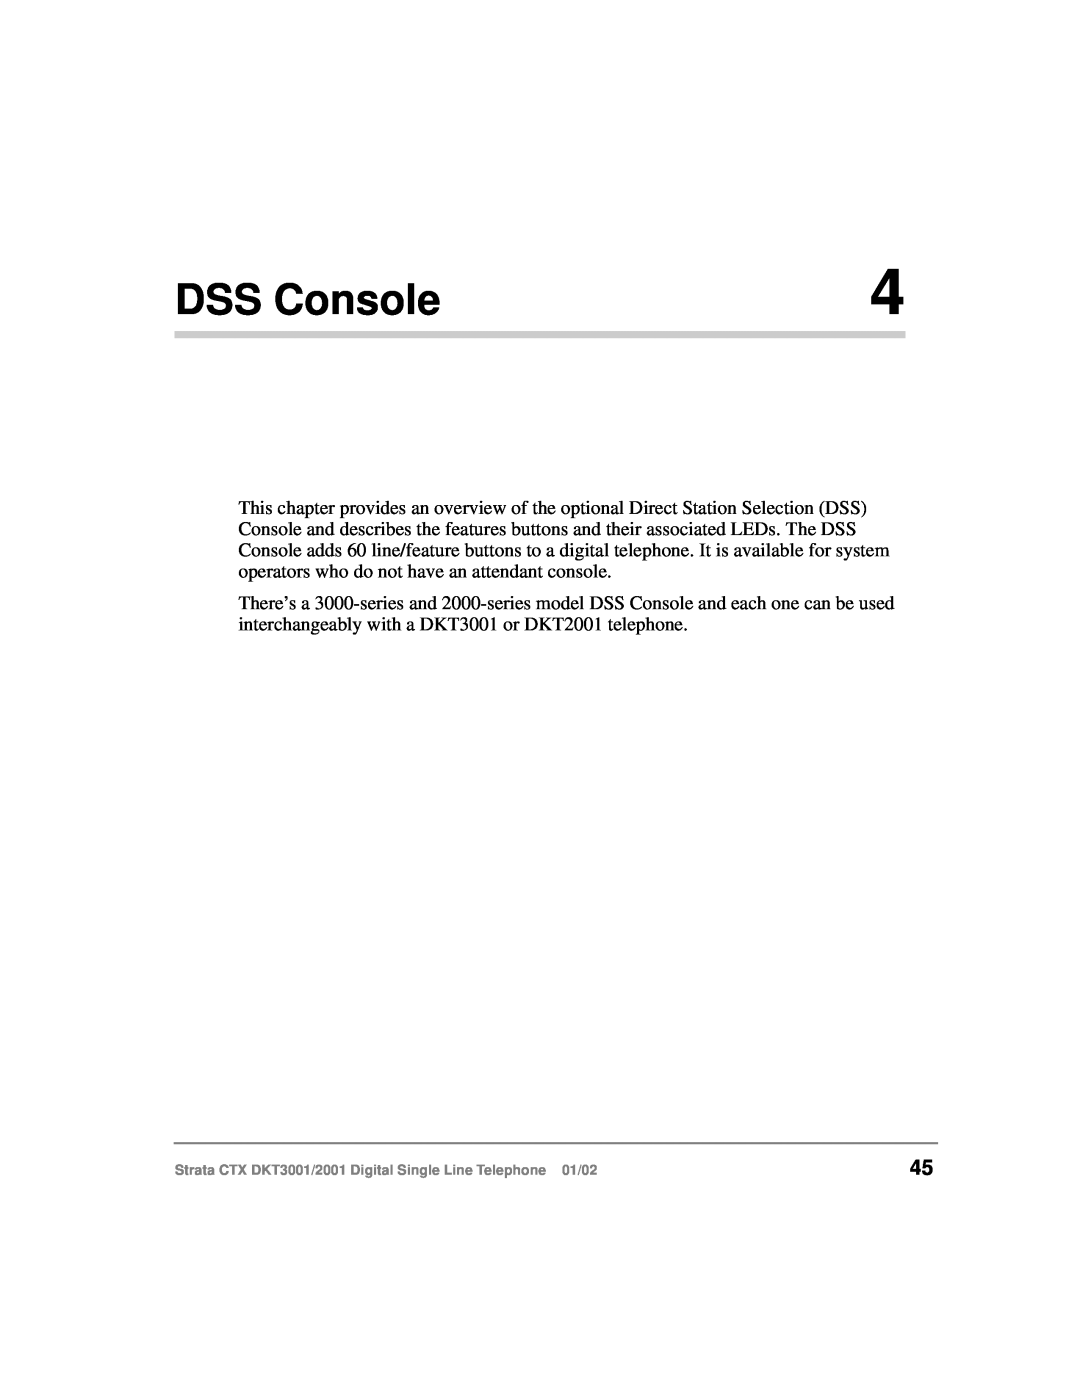 Toshiba 2001, DXT3001 manual DSS Console 